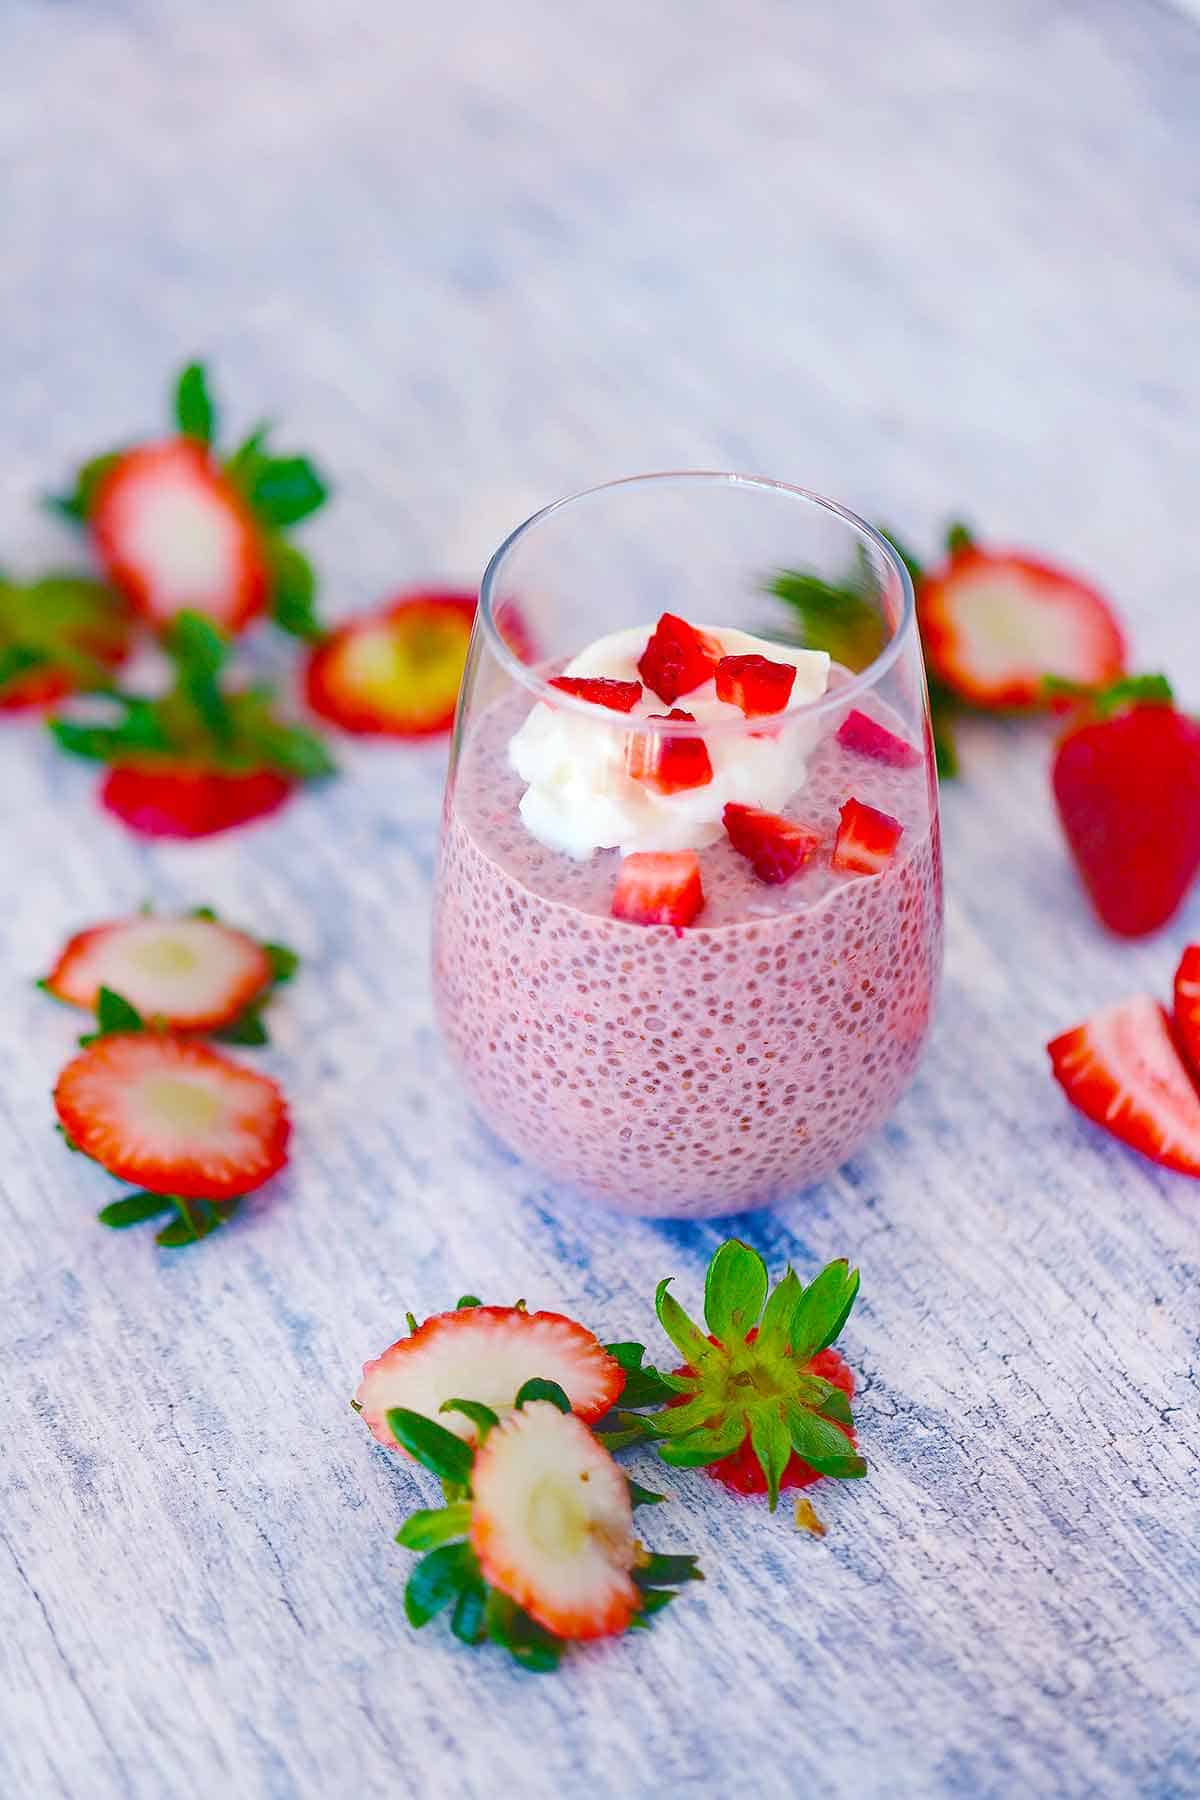 A glass filled with strawberry chia seed pudding with fresh strawberry scraps scattered around, topped with fresh strawberries and whipped cream.